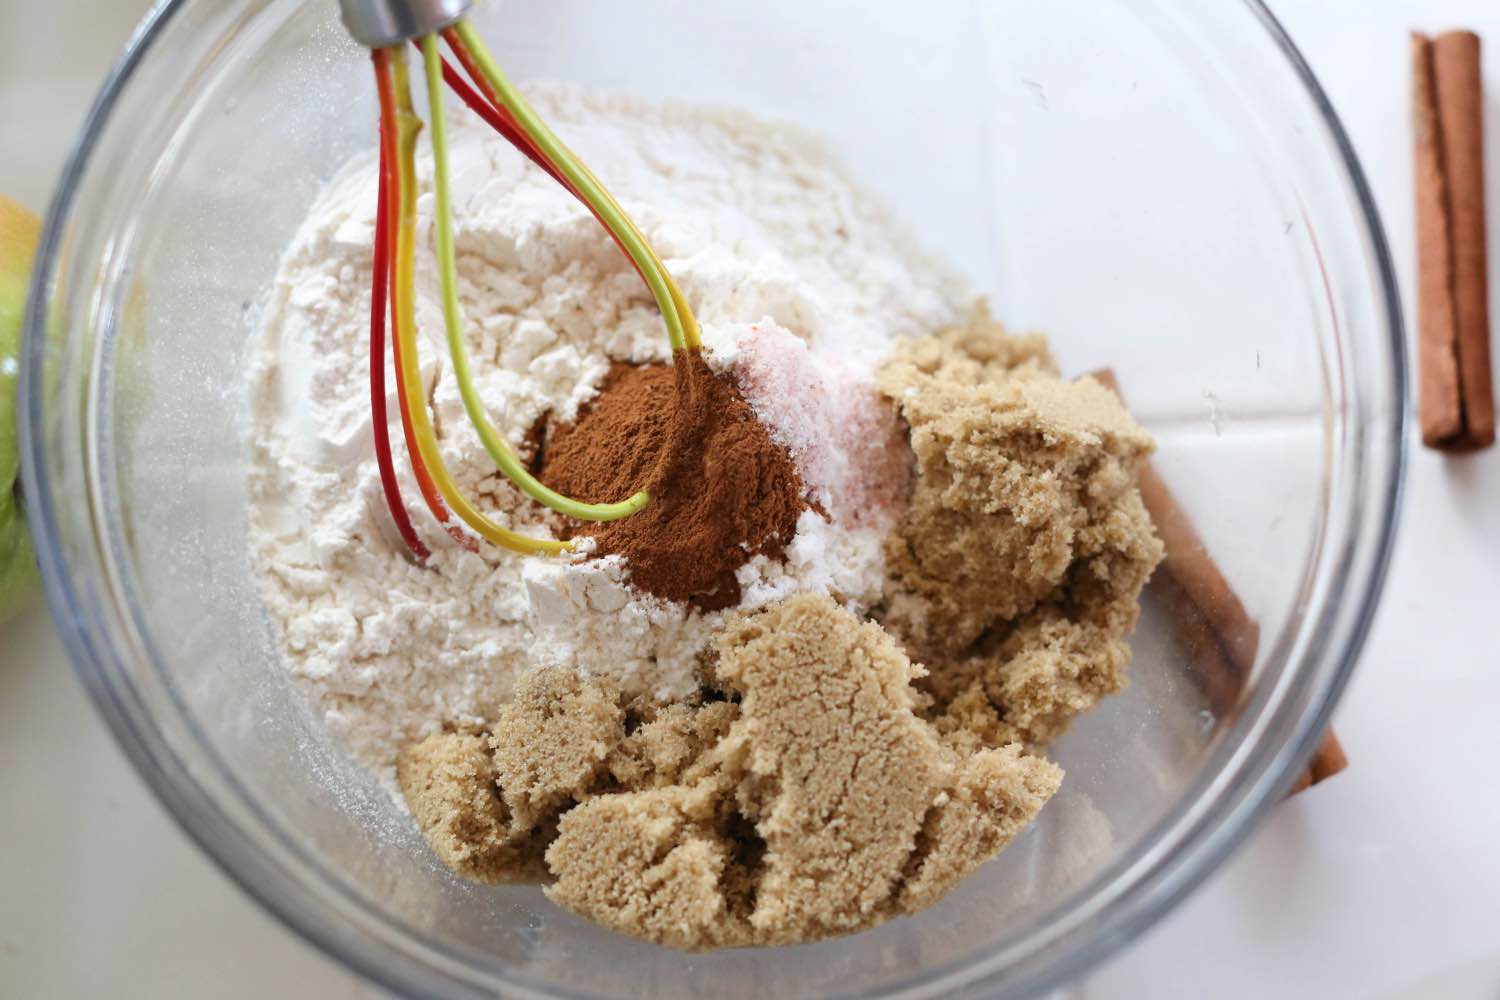 add the cinnamon to the crumble topping recipe pop shop america